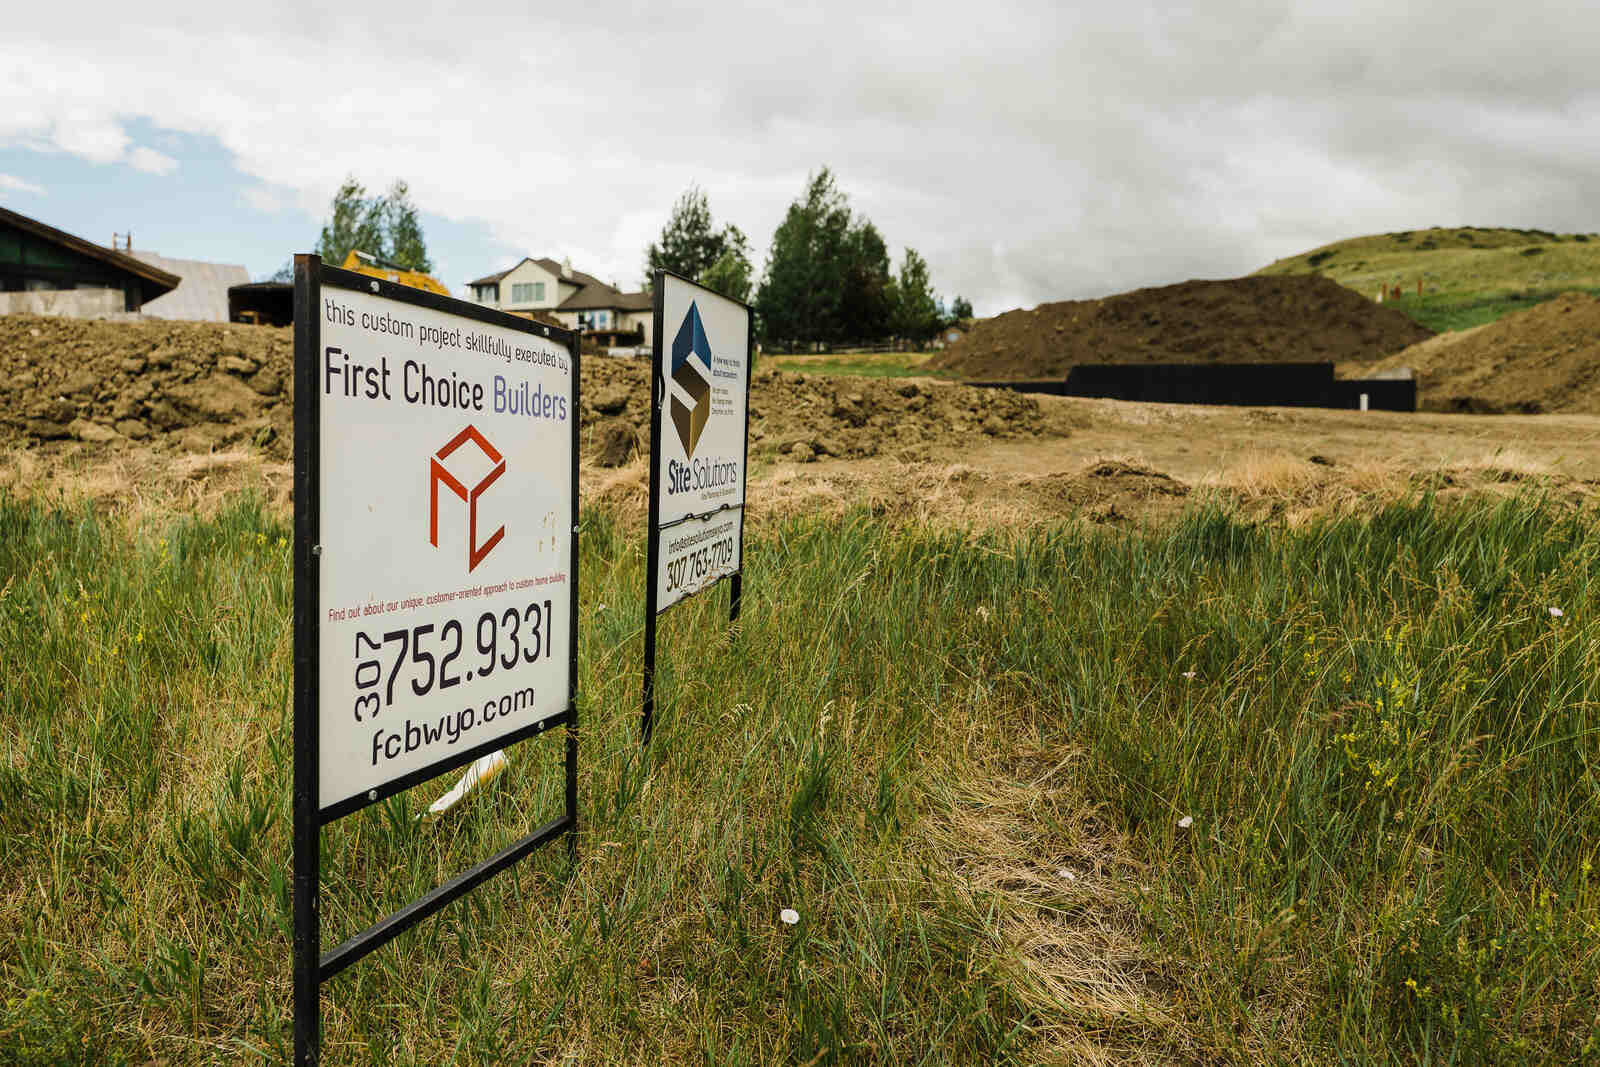 first choice builders custom home builder sign in wyoming